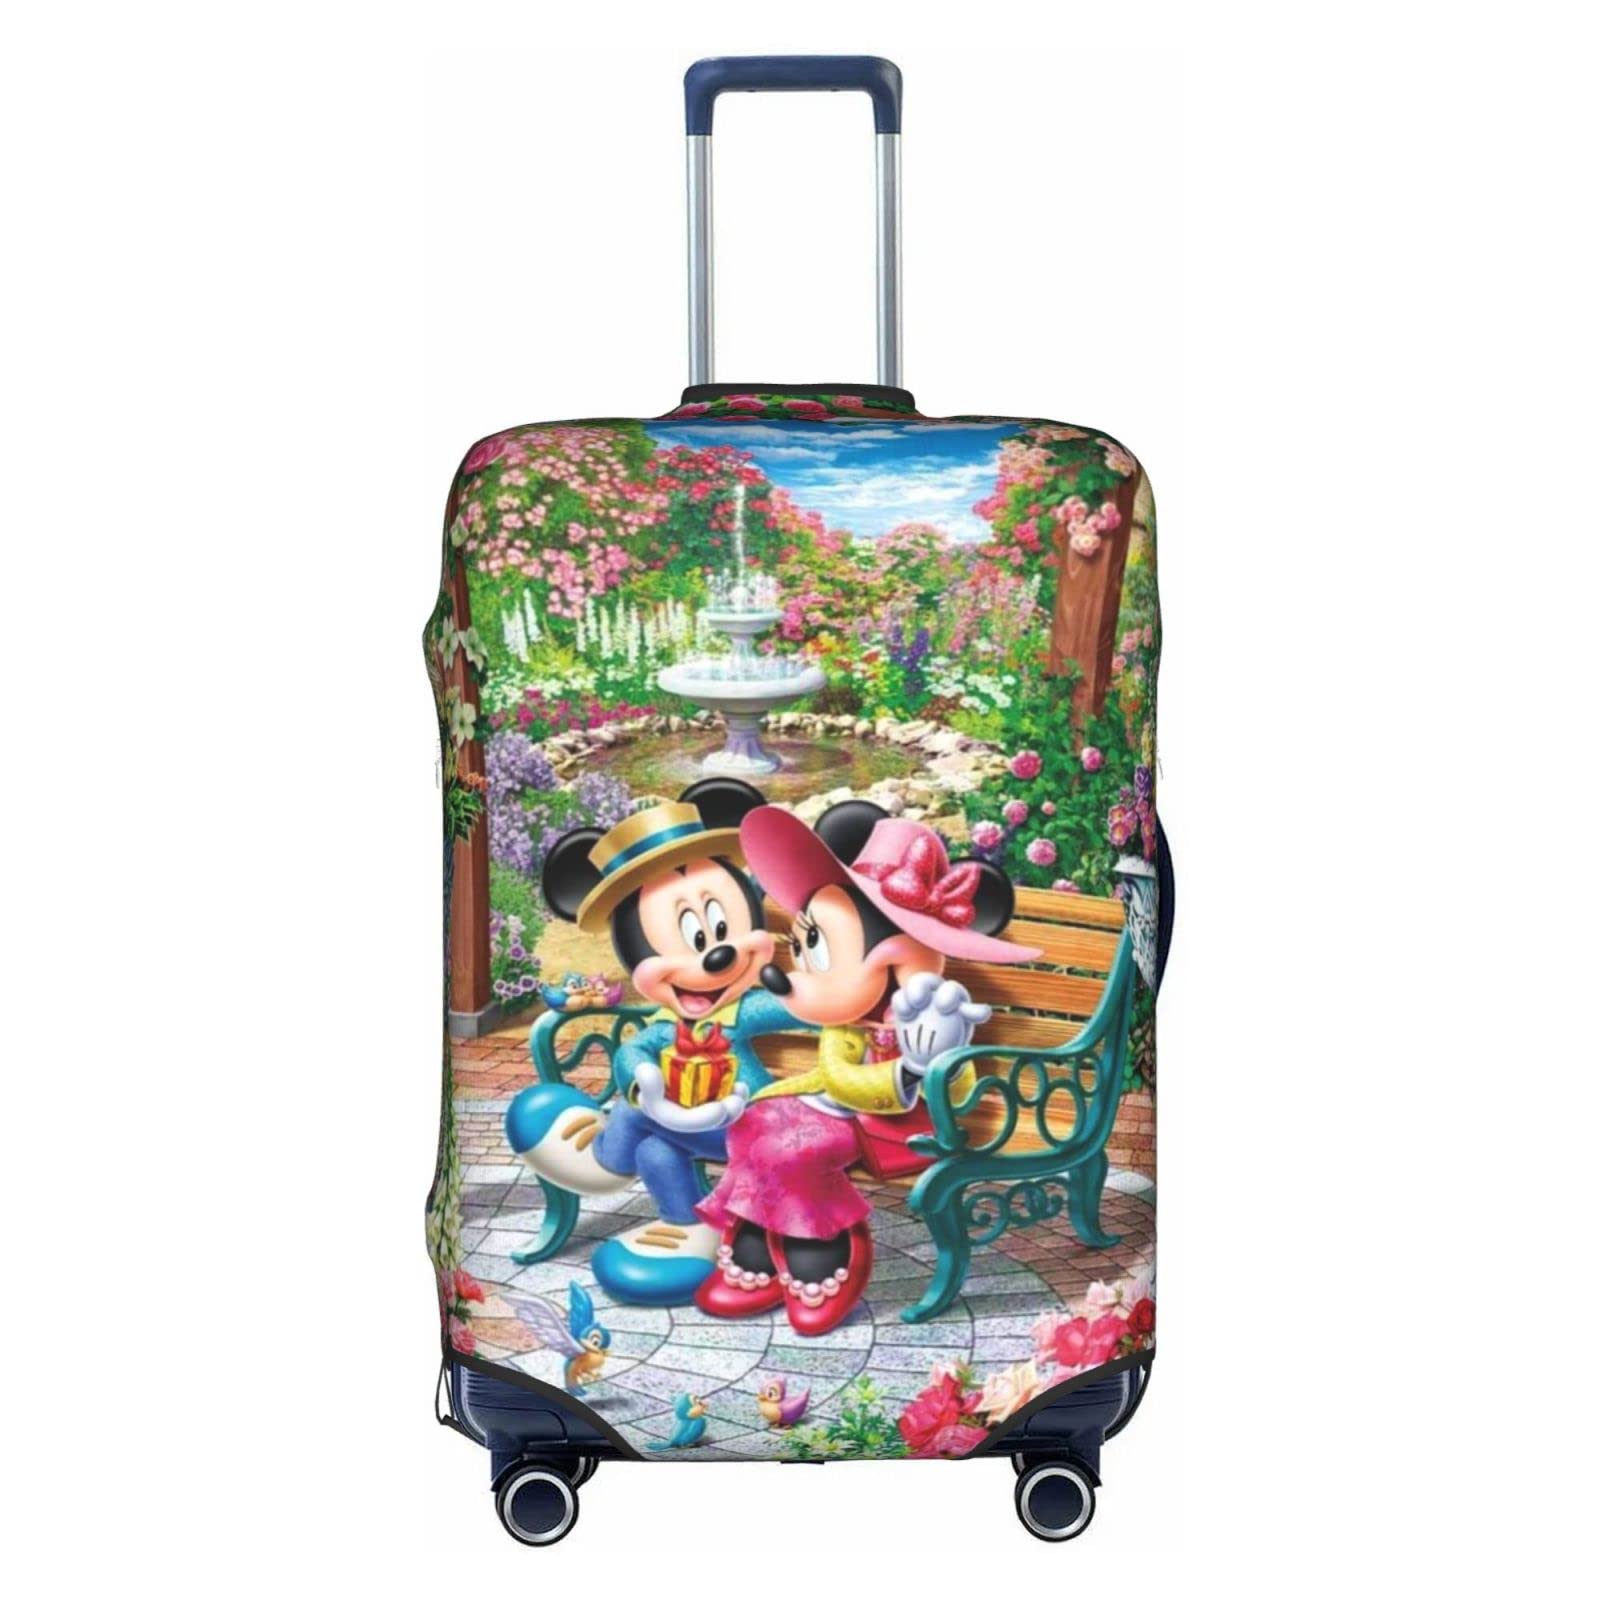 boutique]Cute Anime Suitcase Cover Kawaii Luggage Cover Protector  Consignment Anti-scratch Suitcase | Shopee Philippines